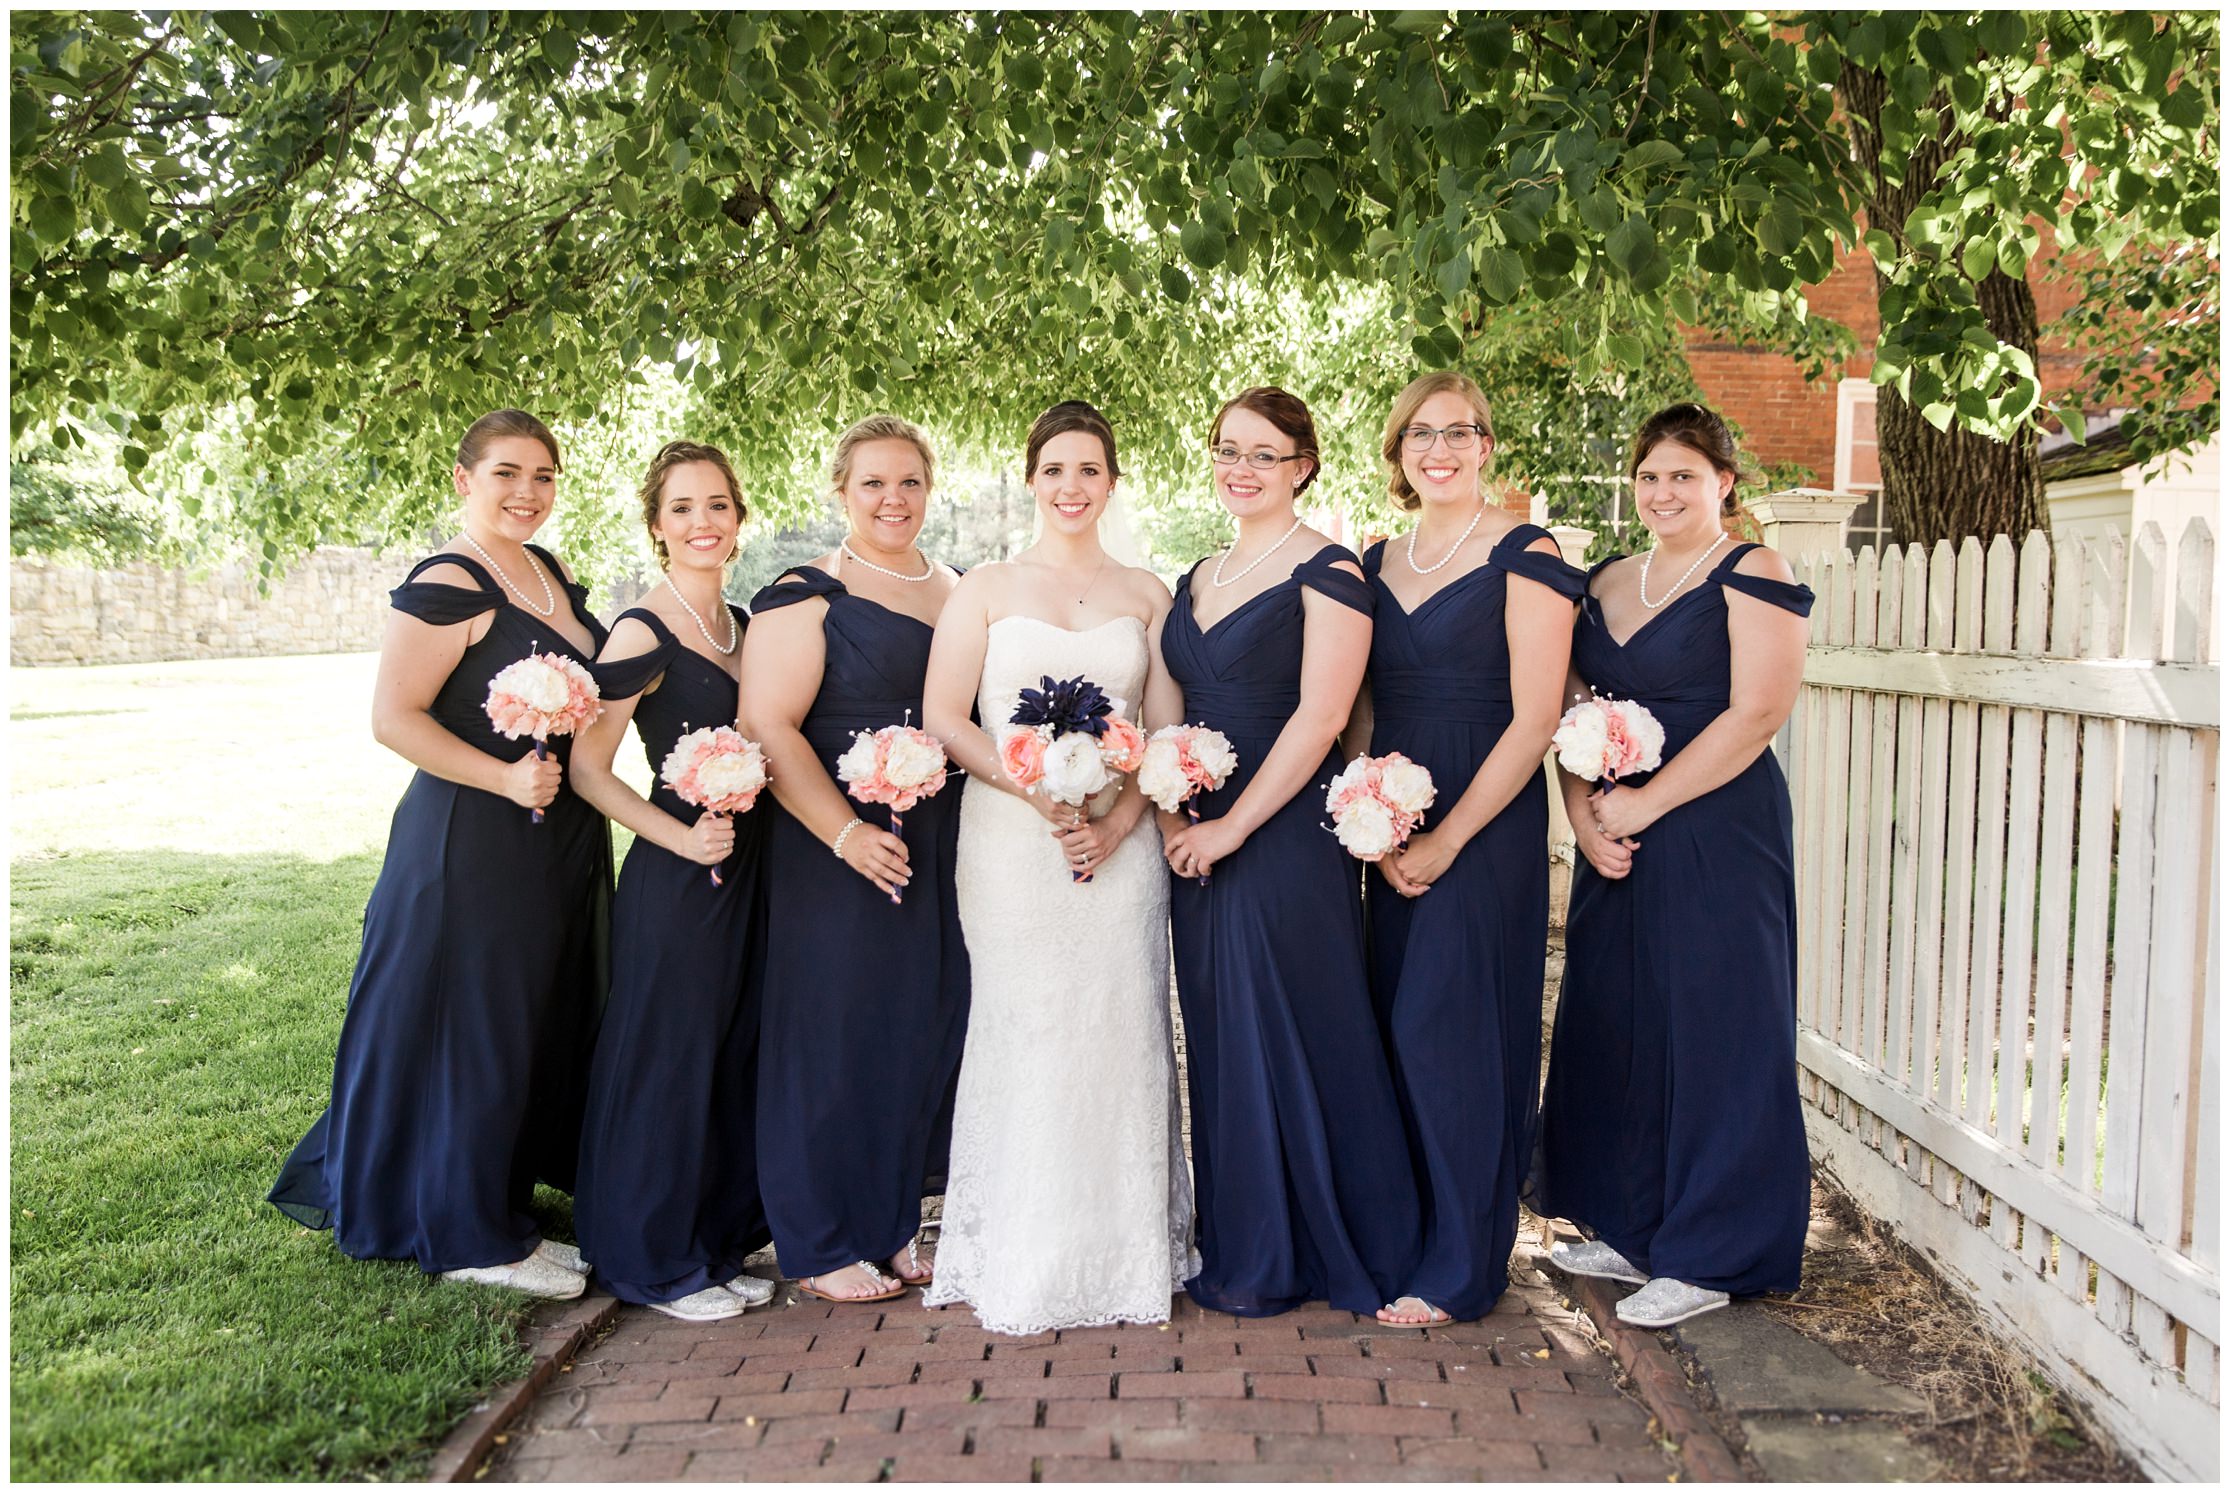 bridal party, blue and coral wedding, old economy village, old economy village wedding, old economy village wedding photographer, old economy village wedding photography, rustic wedding photographer, pennsylvania wedding photographer, western pennsylvania wedding photographer, garden wedding, outdoor wedding, outdoor pittsburgh wedding venue, pittsburgh wedding photographer, pittsburgh wedding photography,